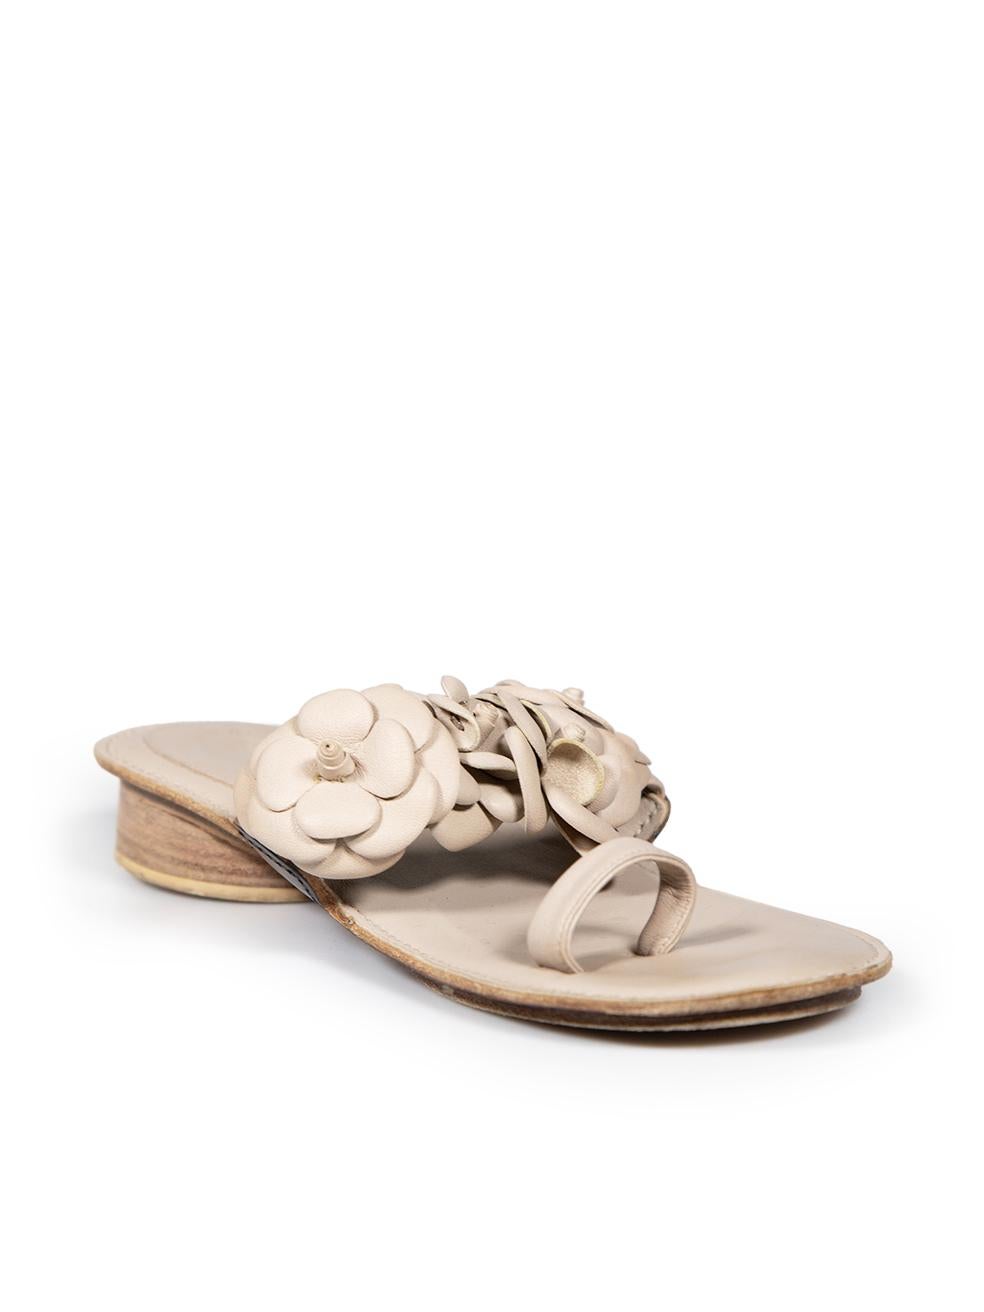 CONDITION is Very good. Minimal wear to sandals is evident. Wear to soles, with fading of the insole brand logo to the left shoe on this used Chanel designer resale item.
 
 
 
 Details
 
 
 Beige
 
 Leather
 
 Sandals
 
 Floral strap detail
 
